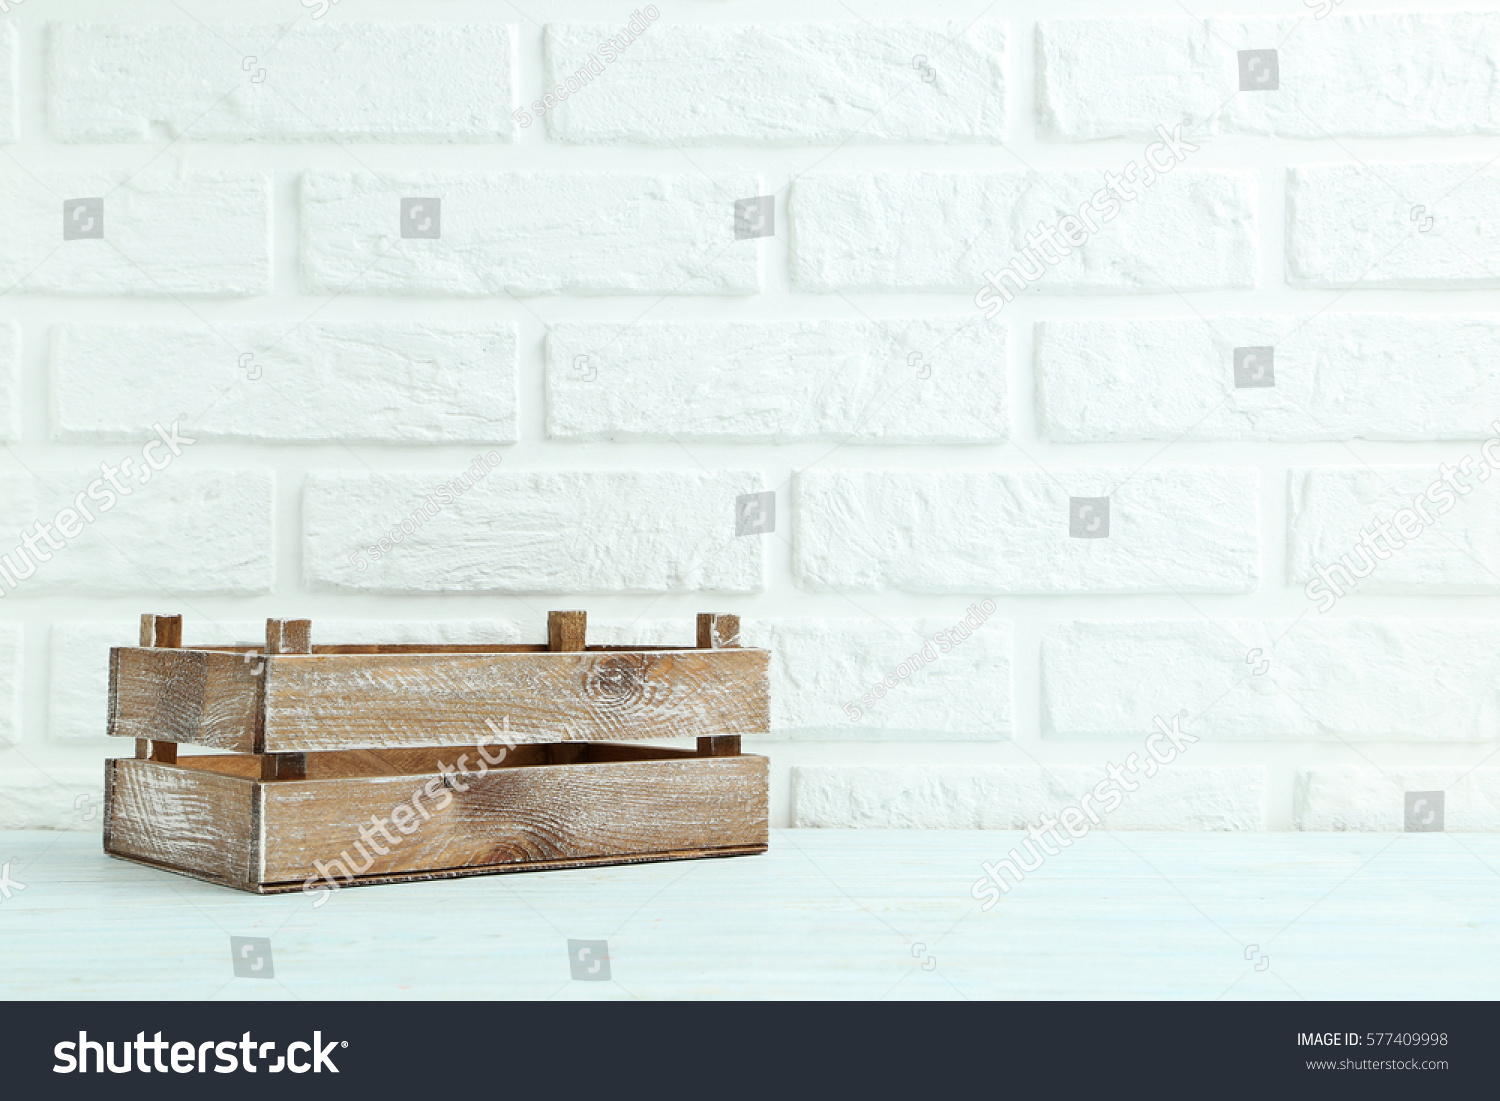 Wooden crate on the brick wall background #577409998